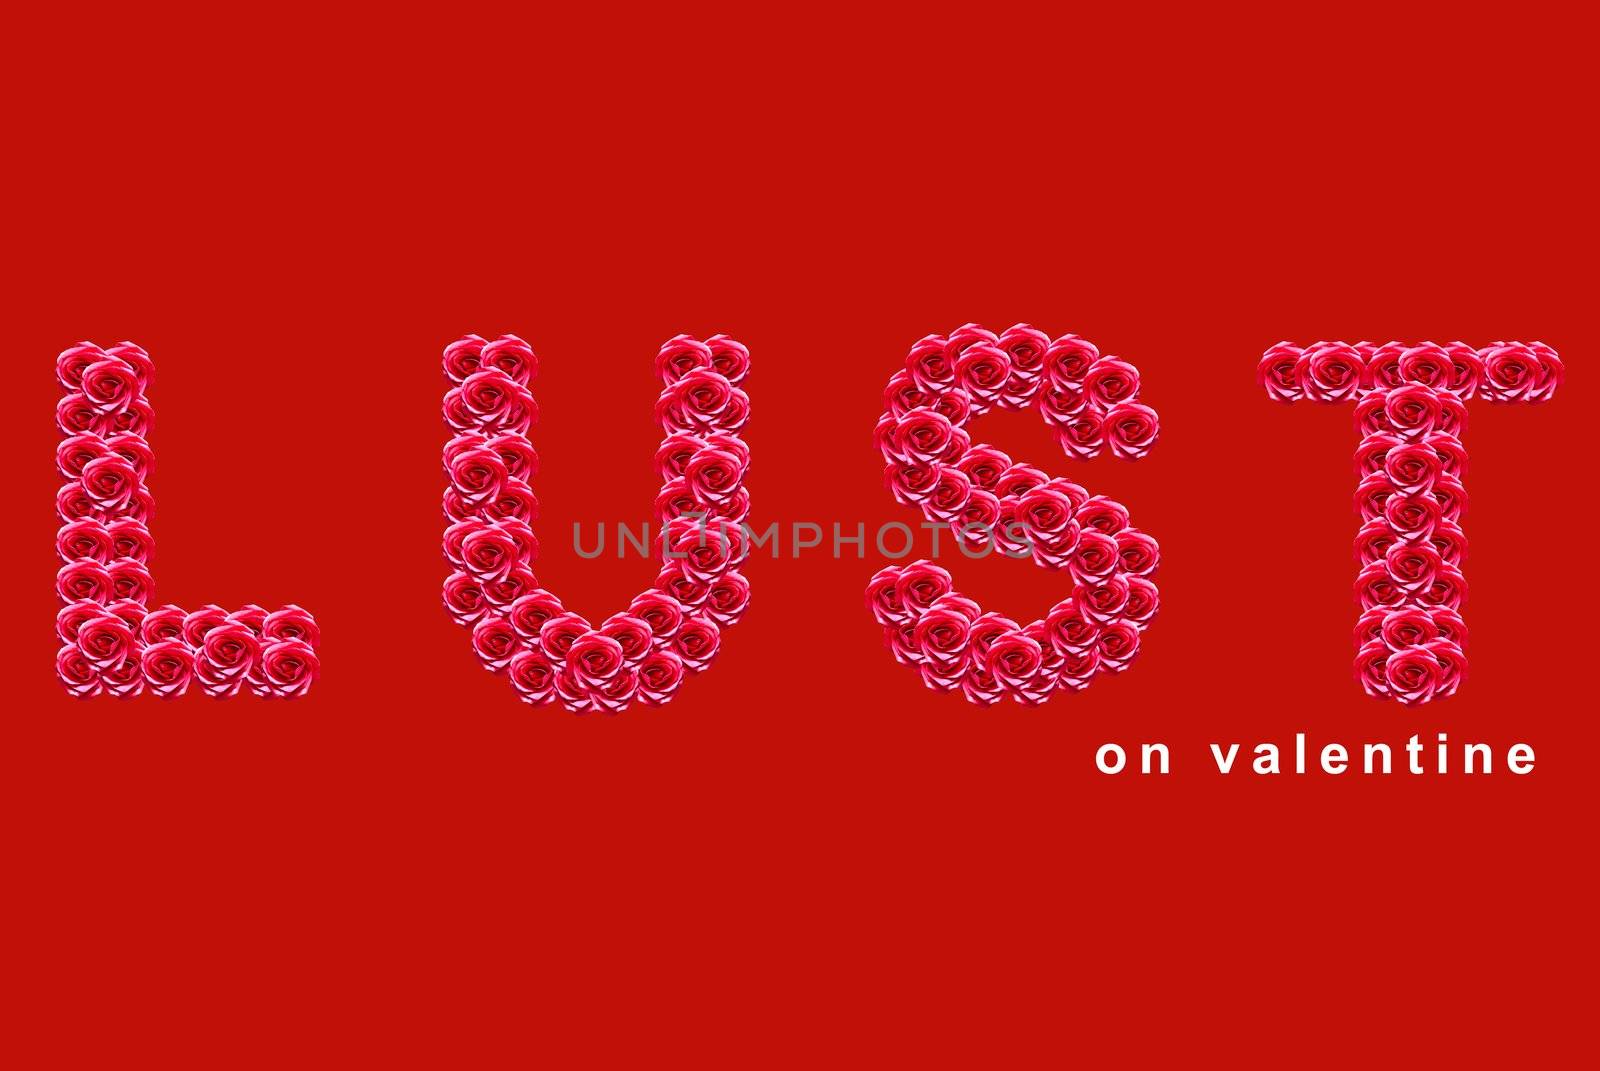 Valentine lust card made from roses by sasilsolutions